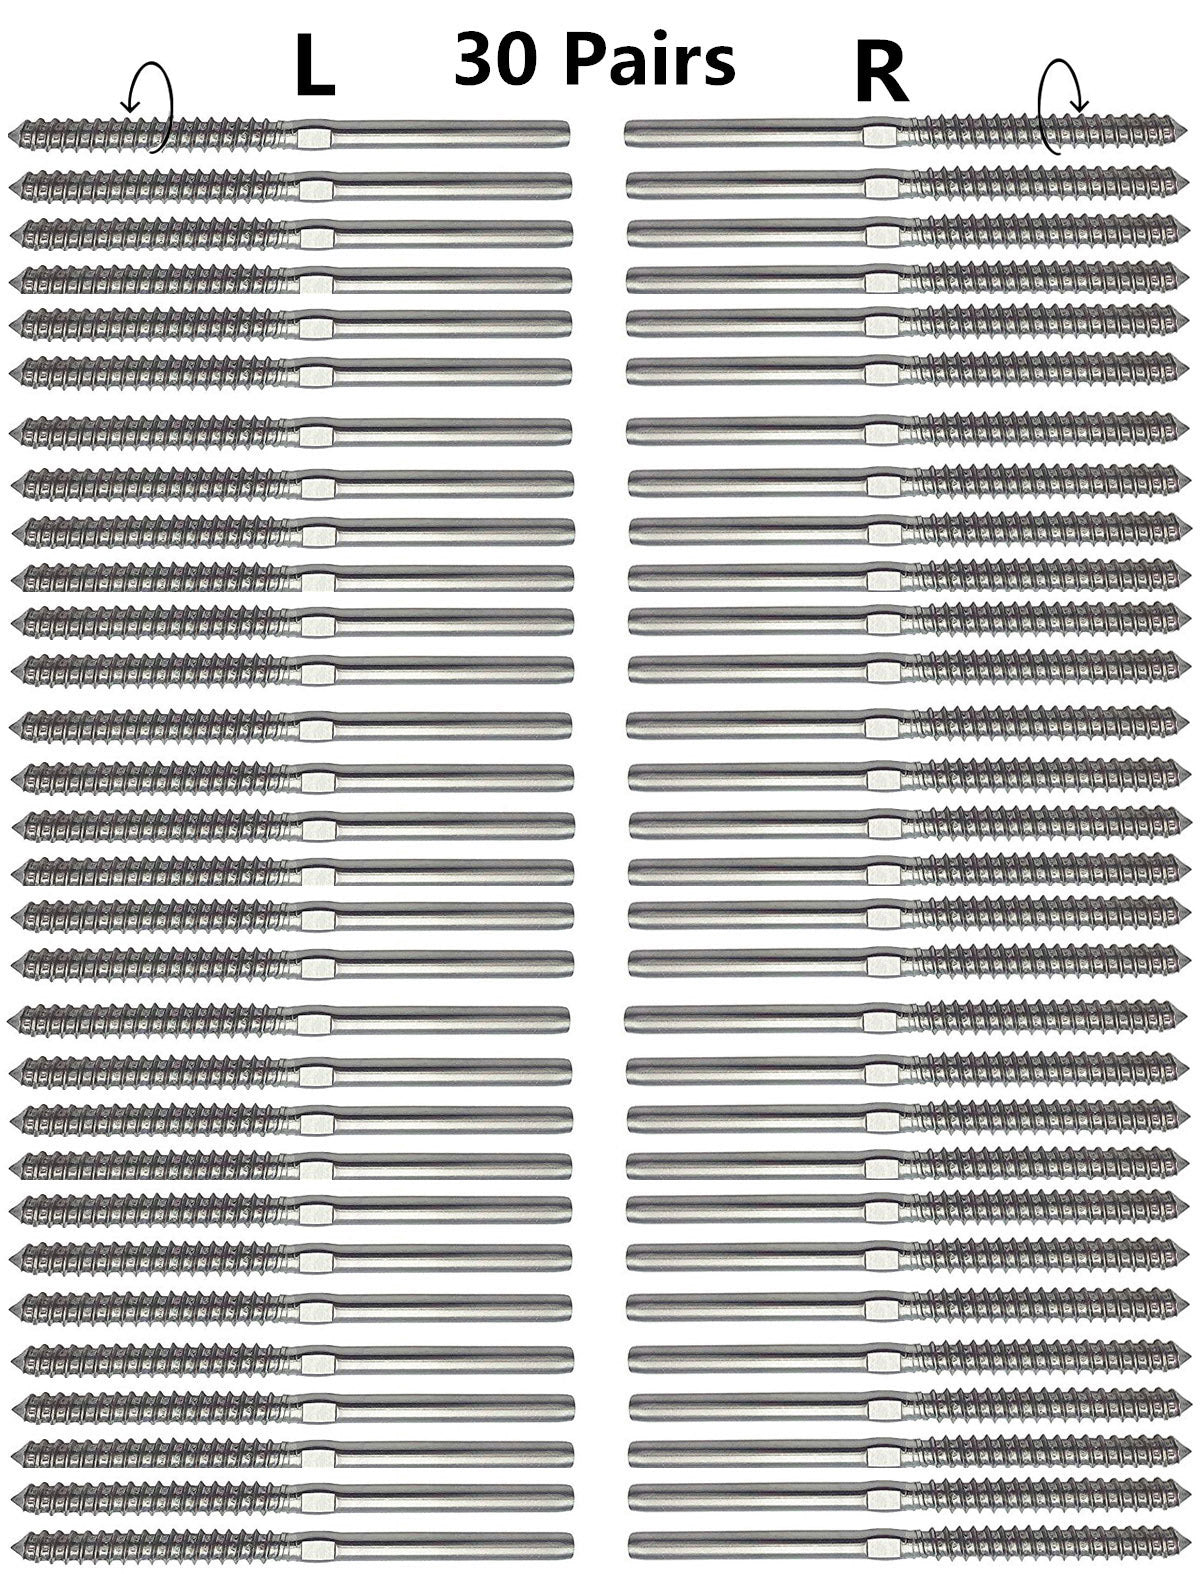 Senmit Swage Lag Screws Left & Right 60 Pack for 1/8" Cable Railing, 316 Stainless Steel Stair Deck Railing Wood Post Balusters System 30 Pairs - Senmit 